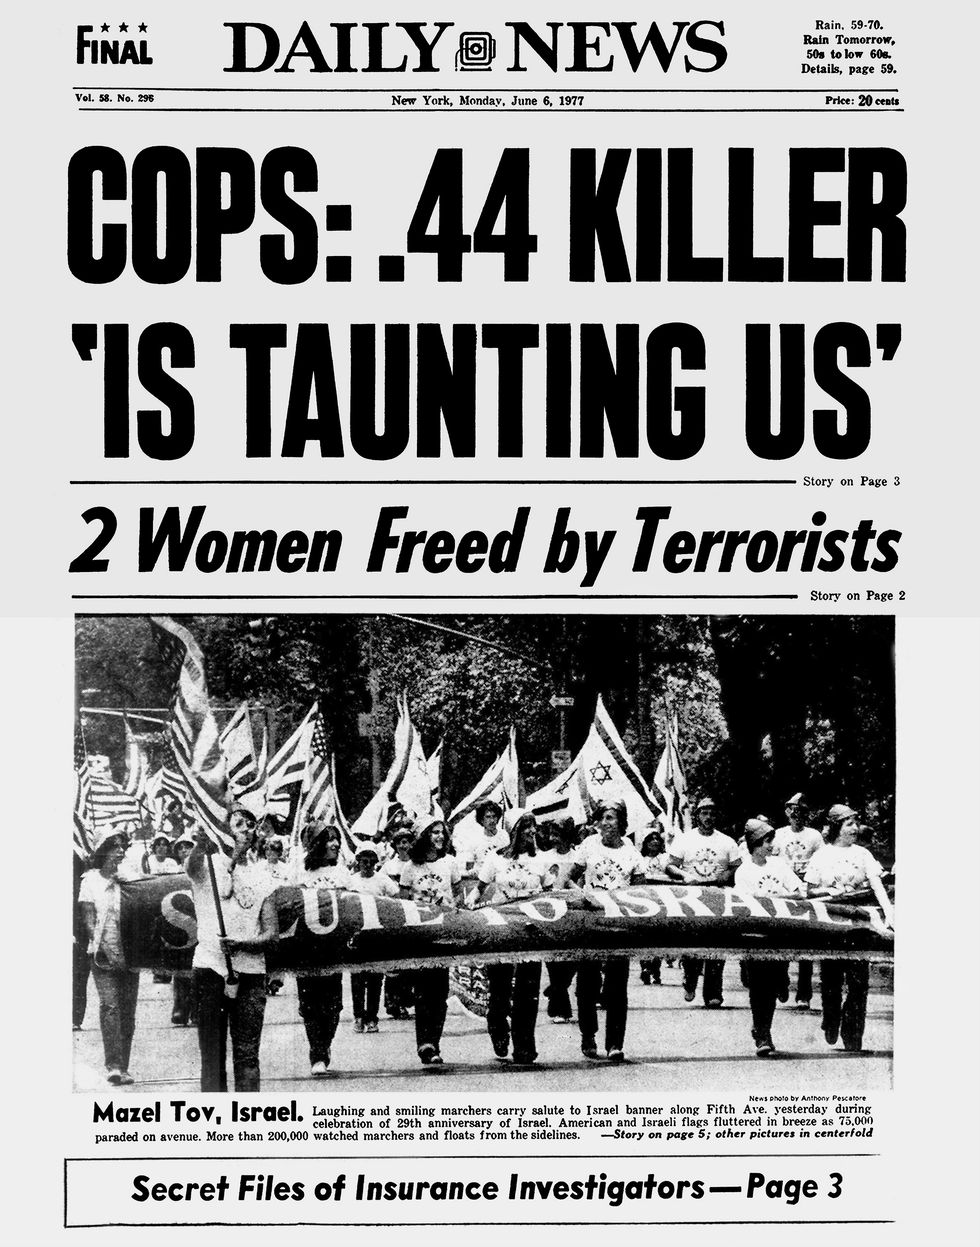 Daily News Front page June 6, 1977 , Headline: COPS: .